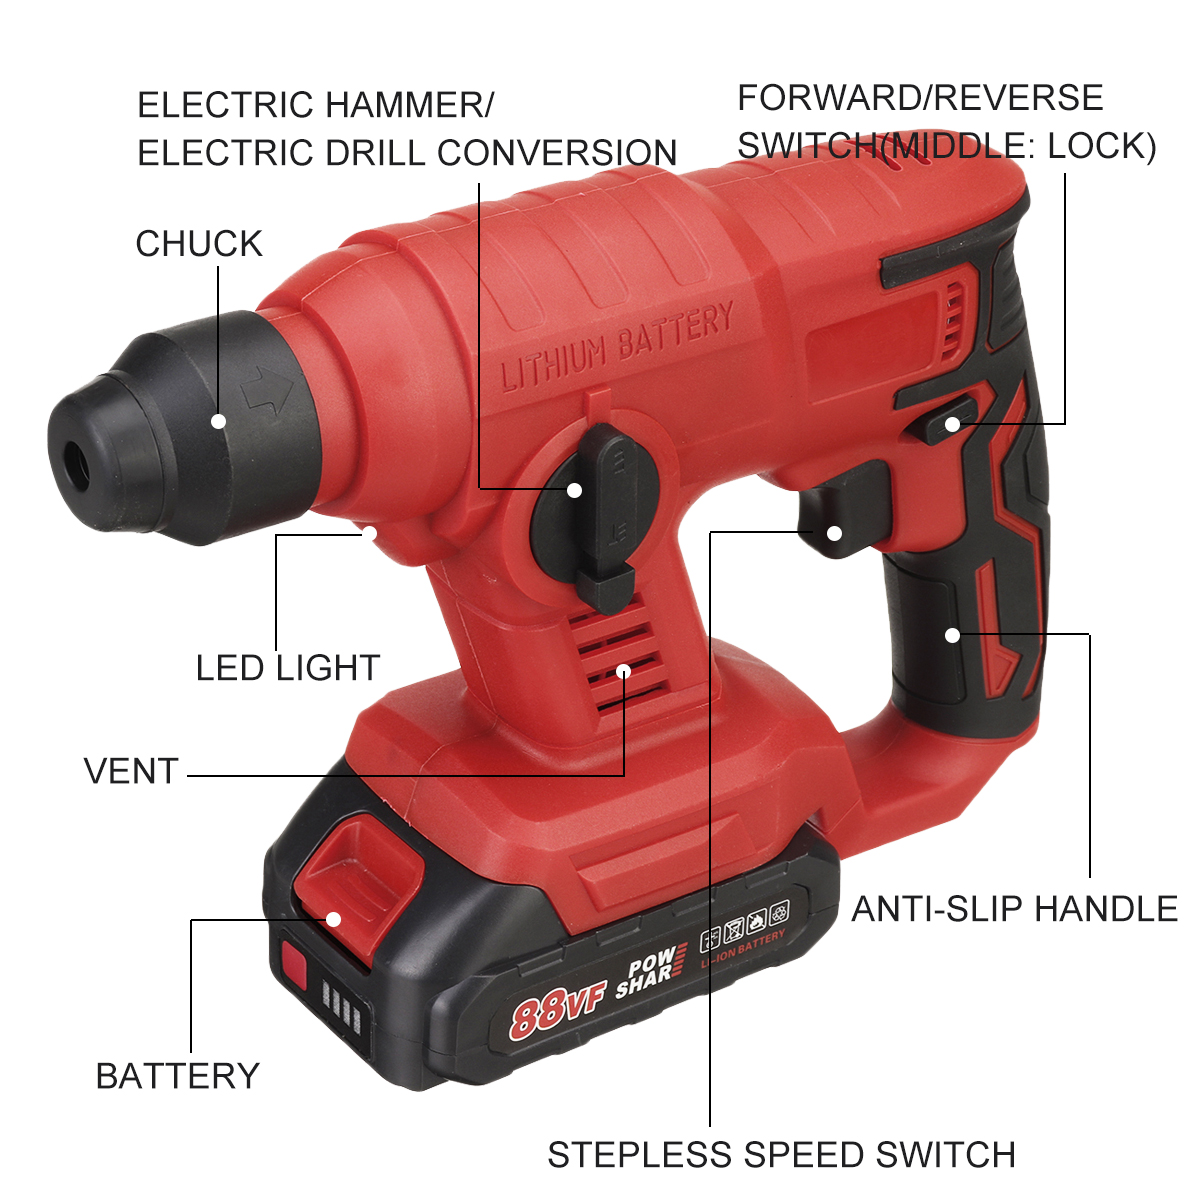 88VF-2000W-Rechargeable-Electric-Hammer-Lithium-Impact-Electric-Hammer-Impact-Drill-With-6mm-Drill-B-1896291-2